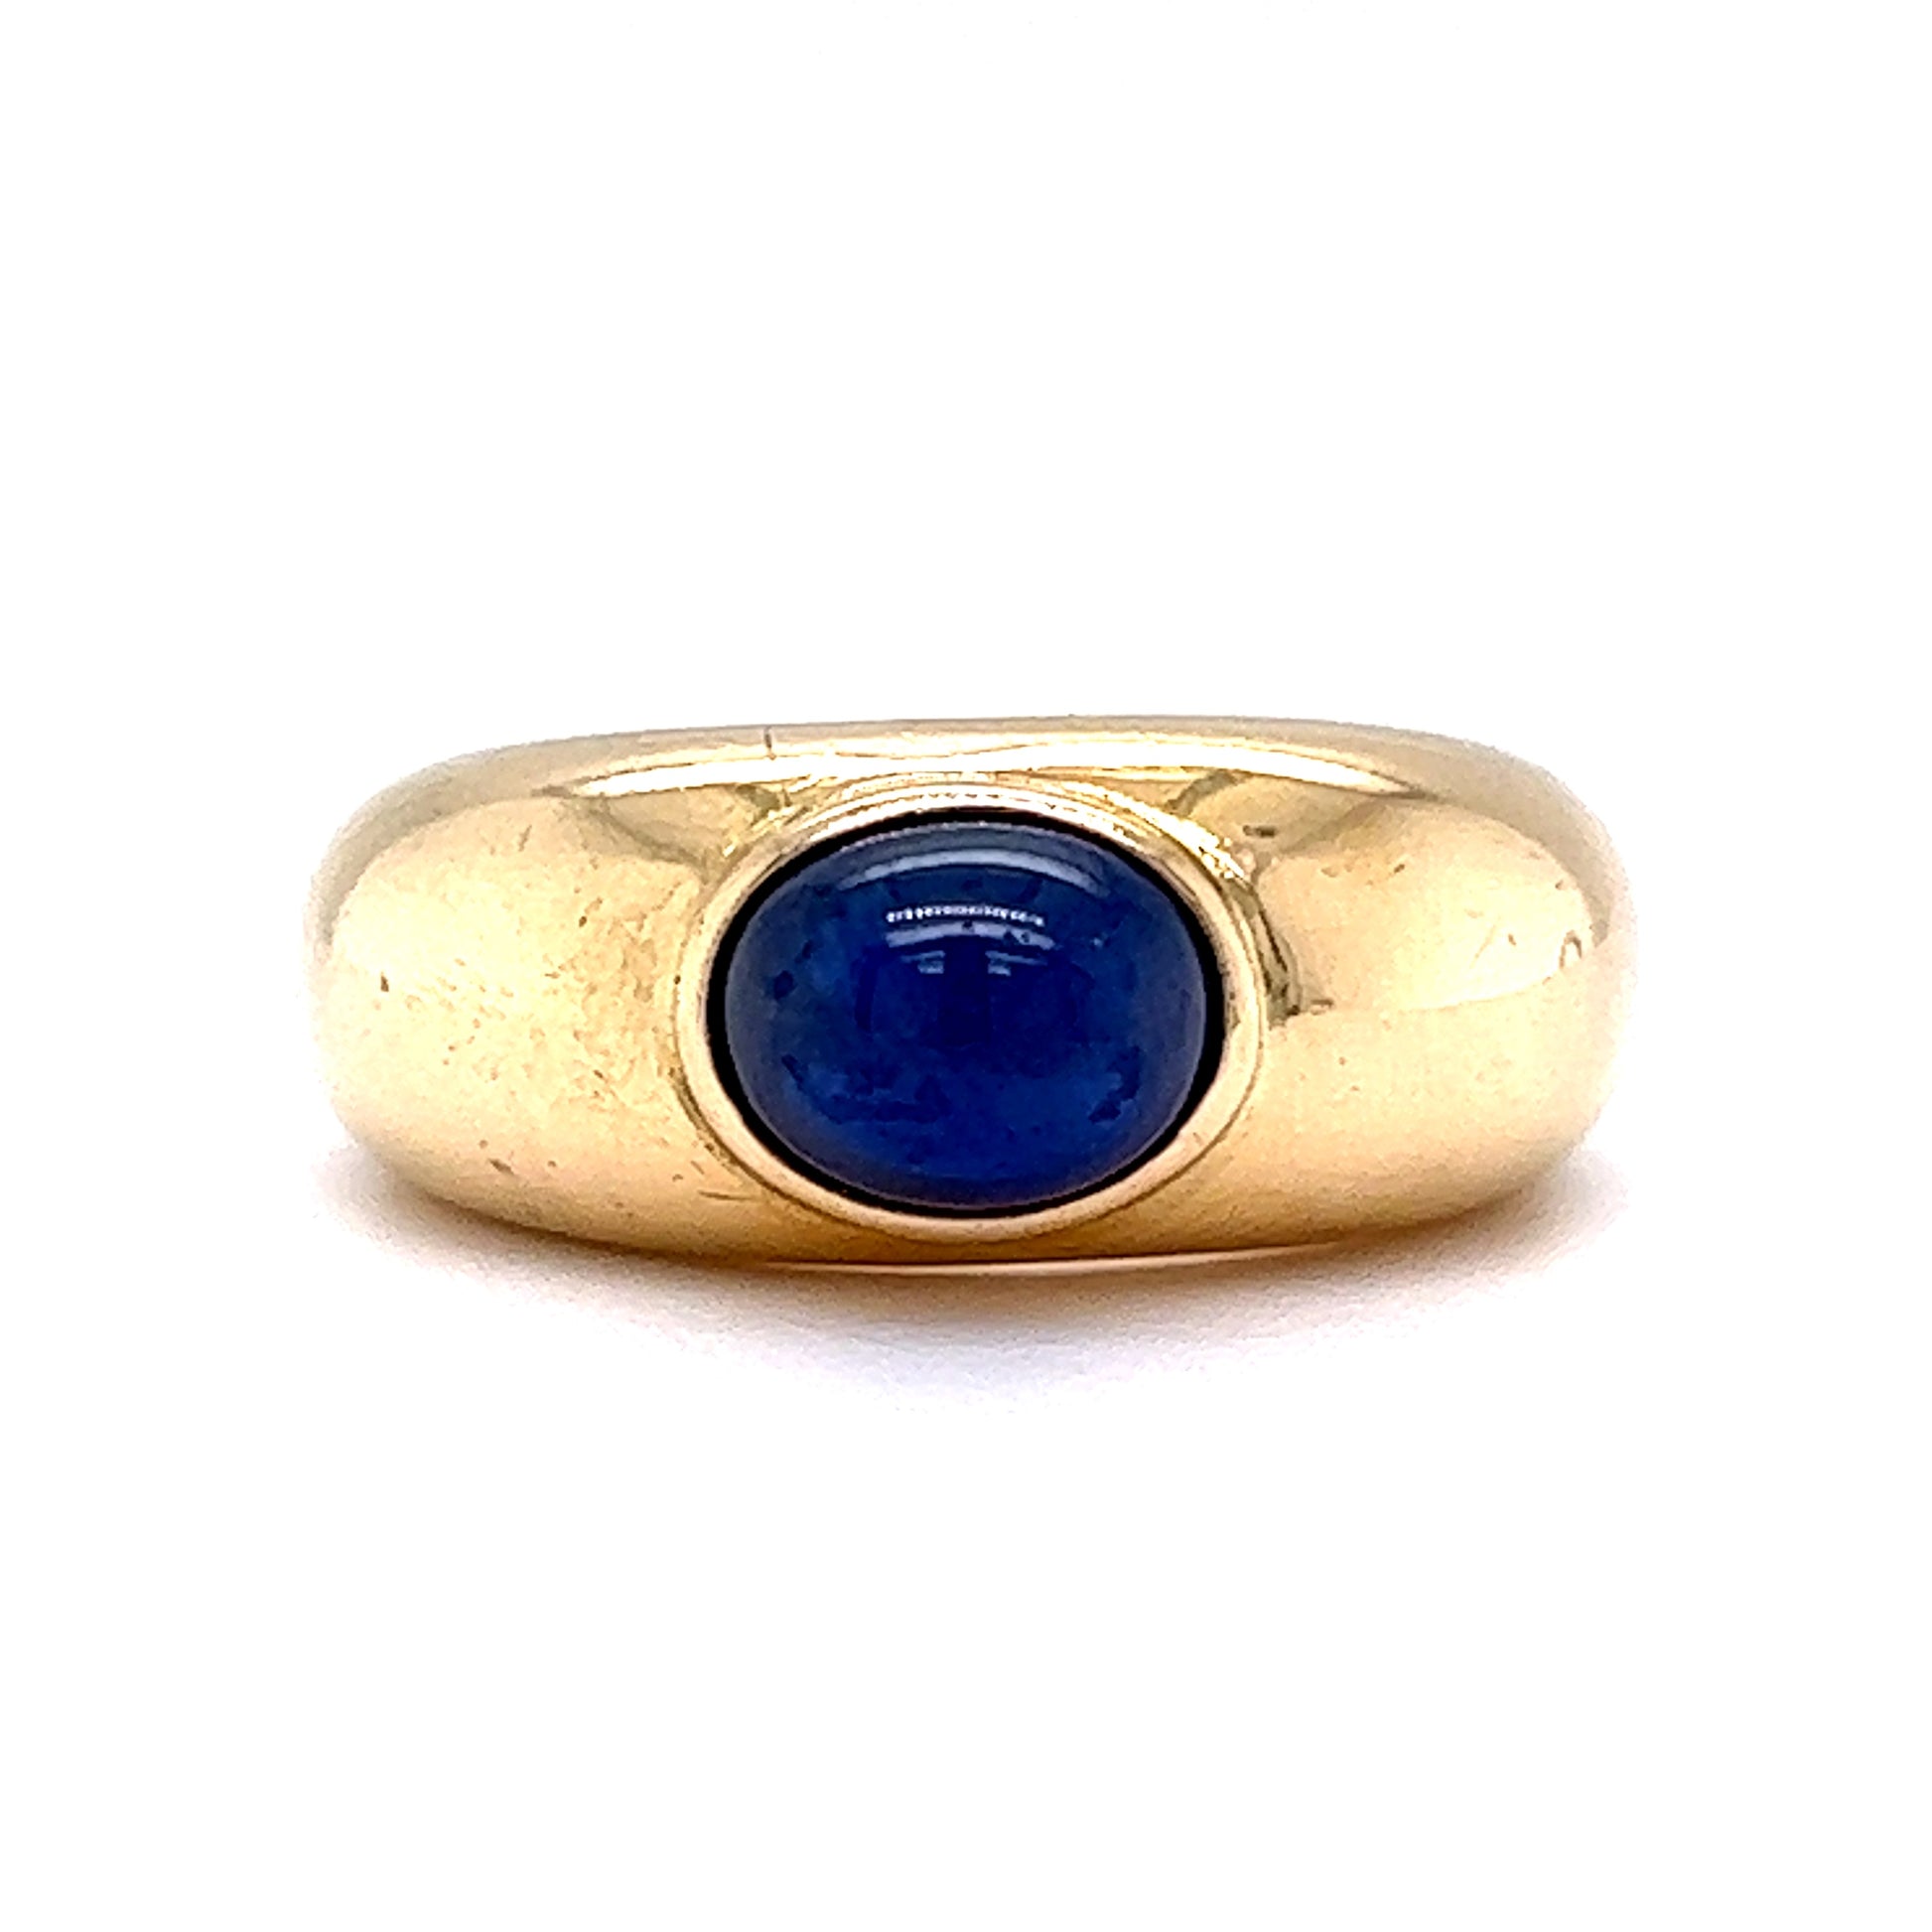 Mid-Century Sapphire Cabochon Ring in 18K Yellow GoldComposition: 18 Karat Yellow Gold Ring Size: 5.75 Total Gram Weight: 7.3 g